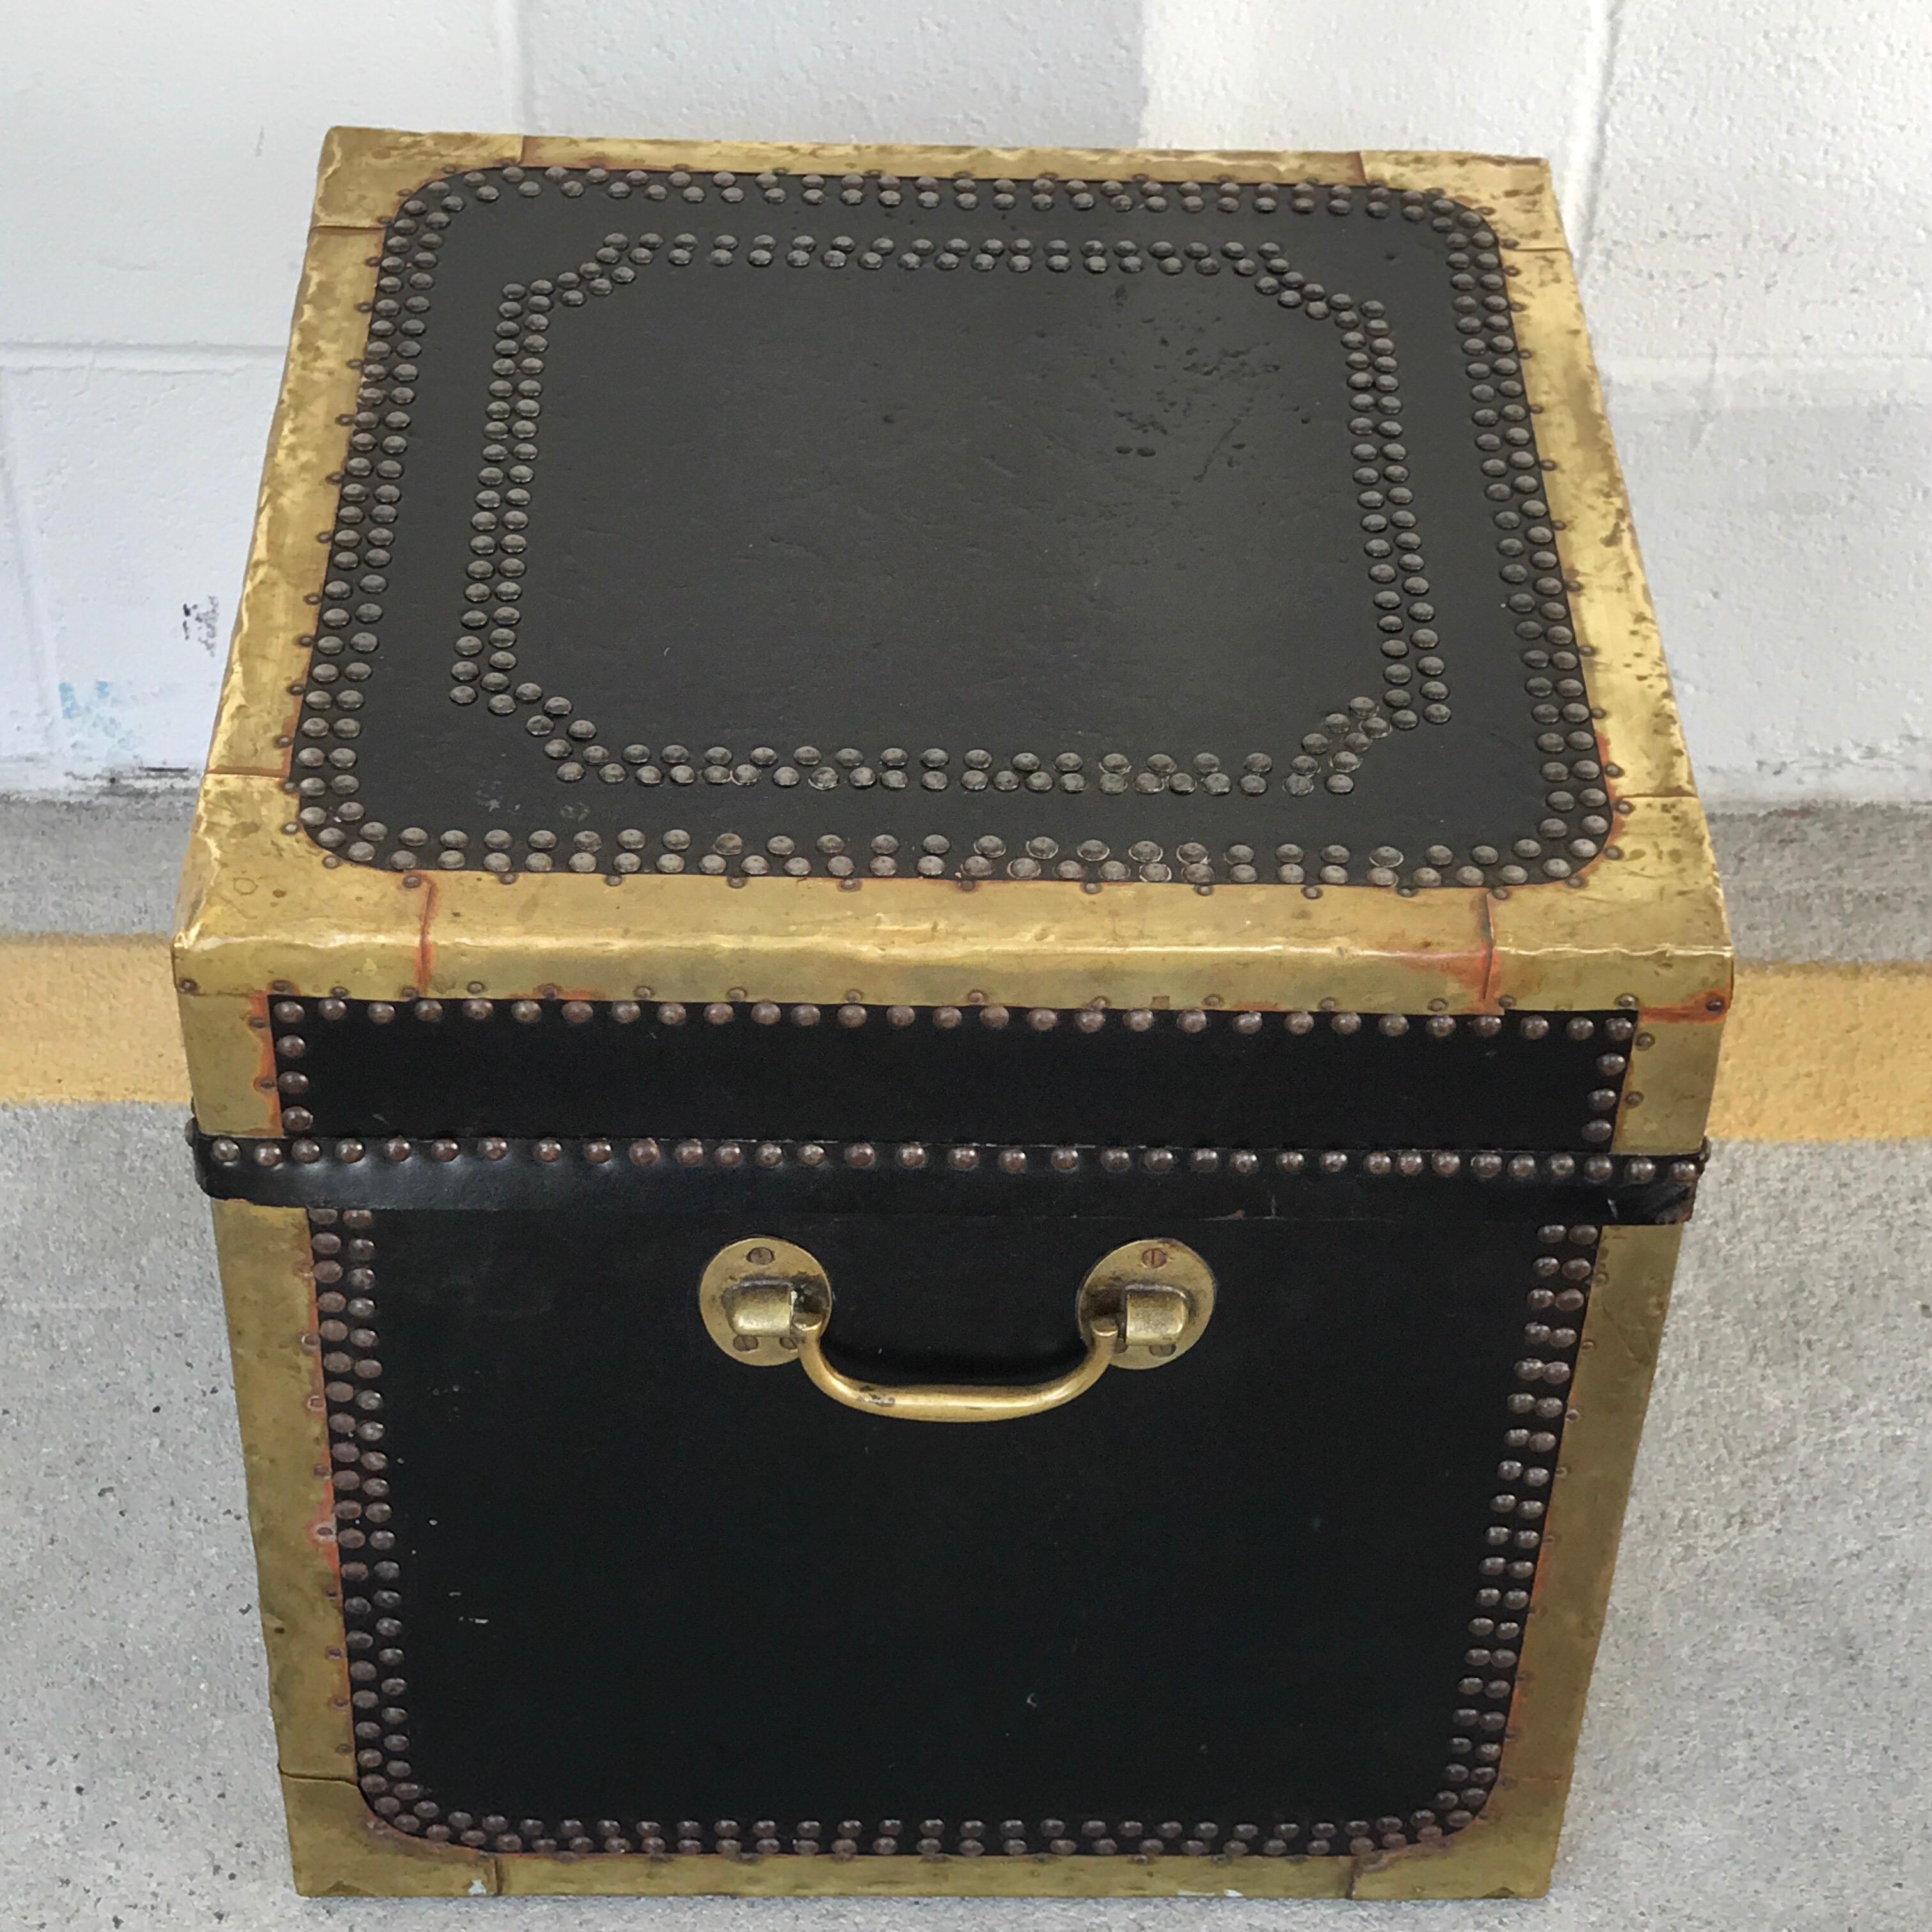 Regency style brass-mounted leather cube trunk, wonderfully distressed surface with brass and steel detail, with two brass bail handles, lock present, no key, fitted with a wood interior. Structurally sound
Interior measures 14